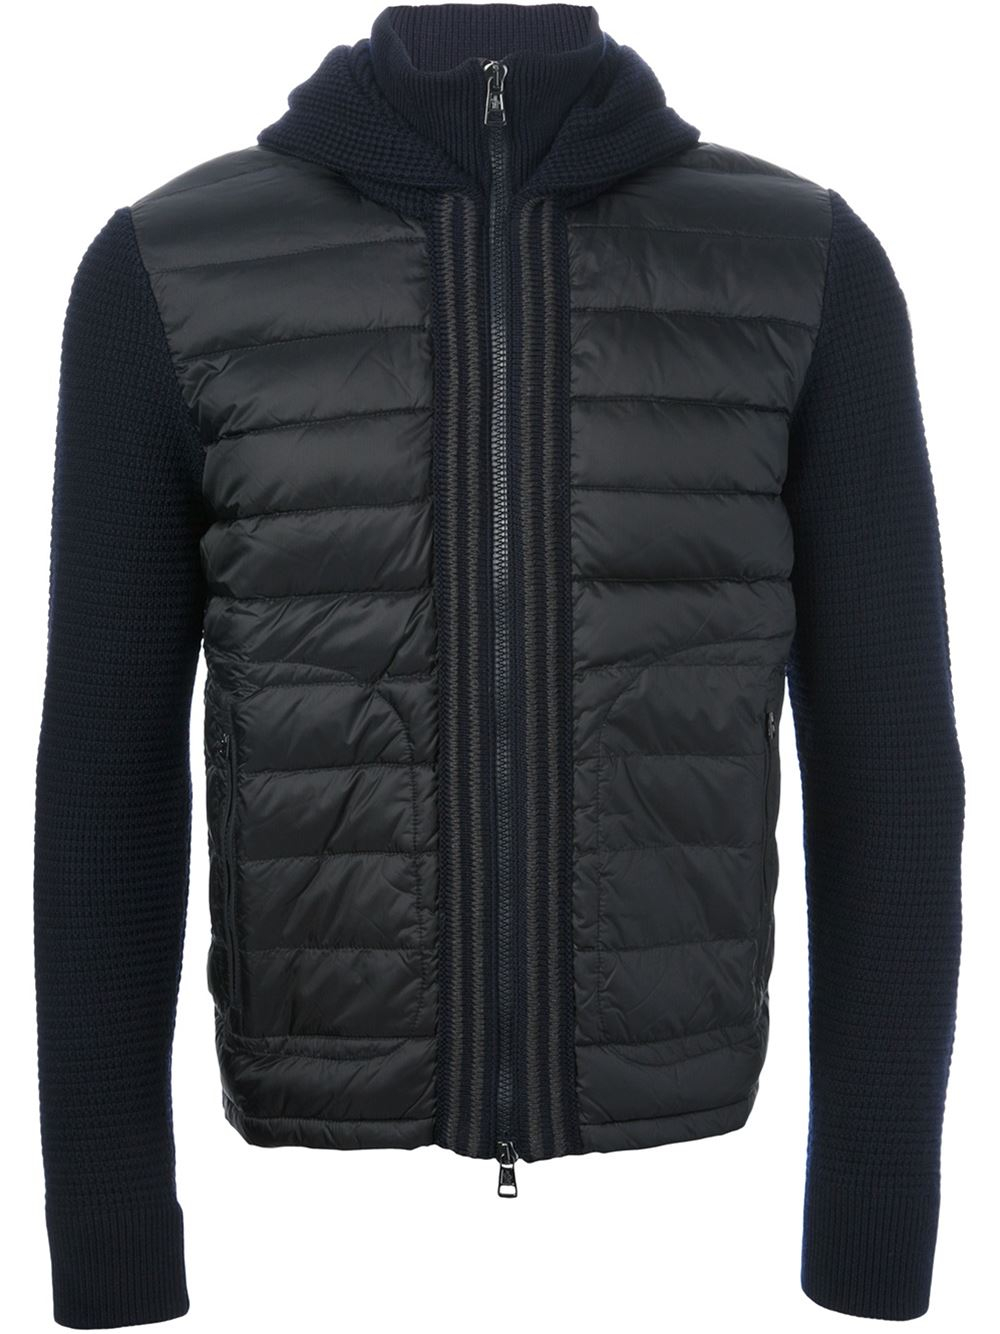 Moncler Canut Knitted Jacket in Blue for Men - Lyst